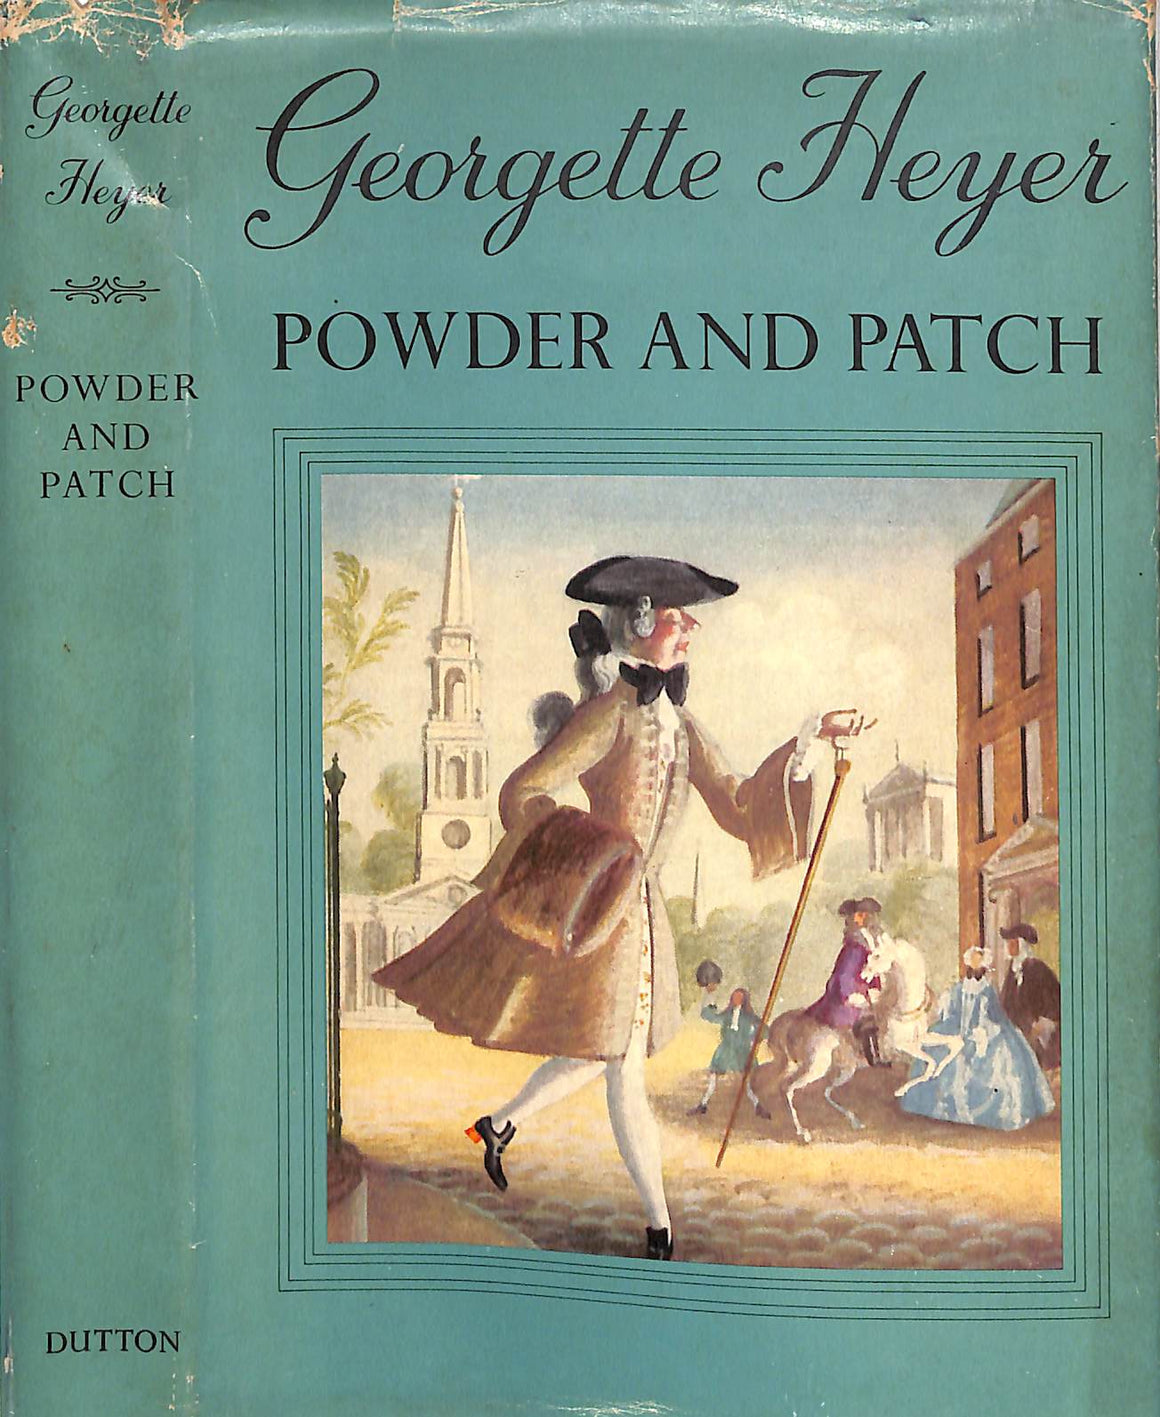 "Powder And Patch: A Comedy Of Manners" 1968 HEYER, Georgette